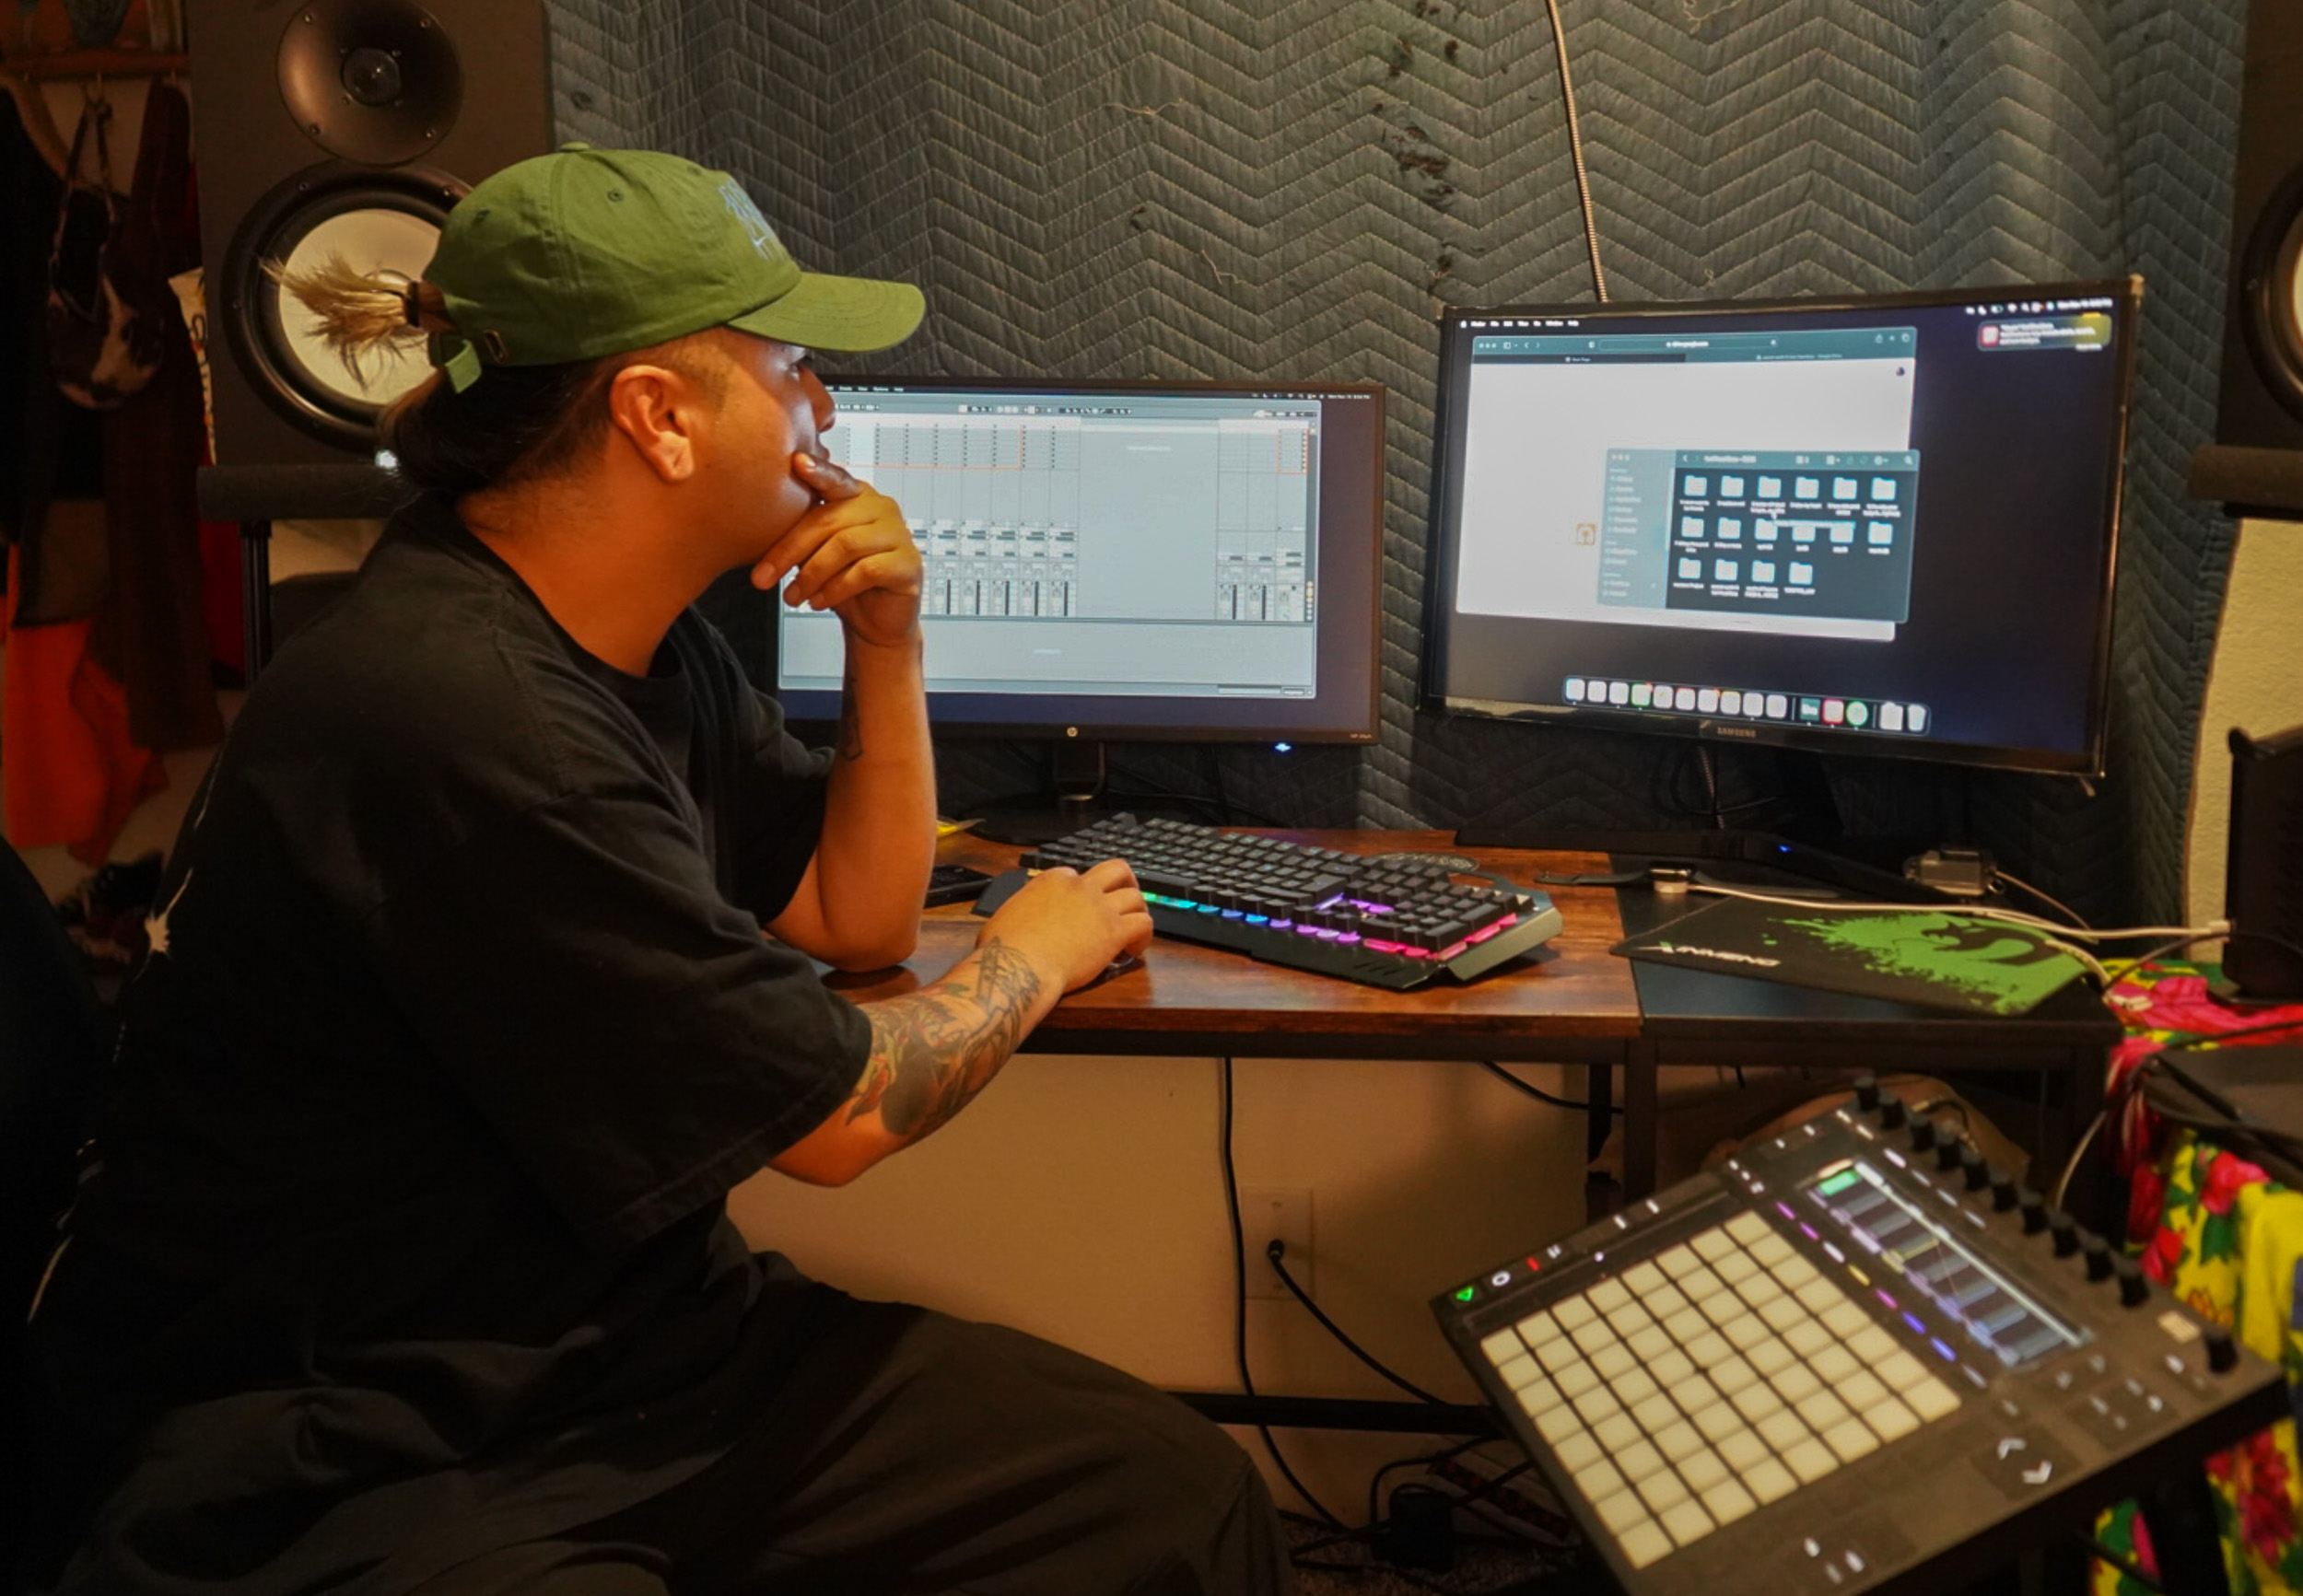 Toni Heartless works on tracks in his living room studio.